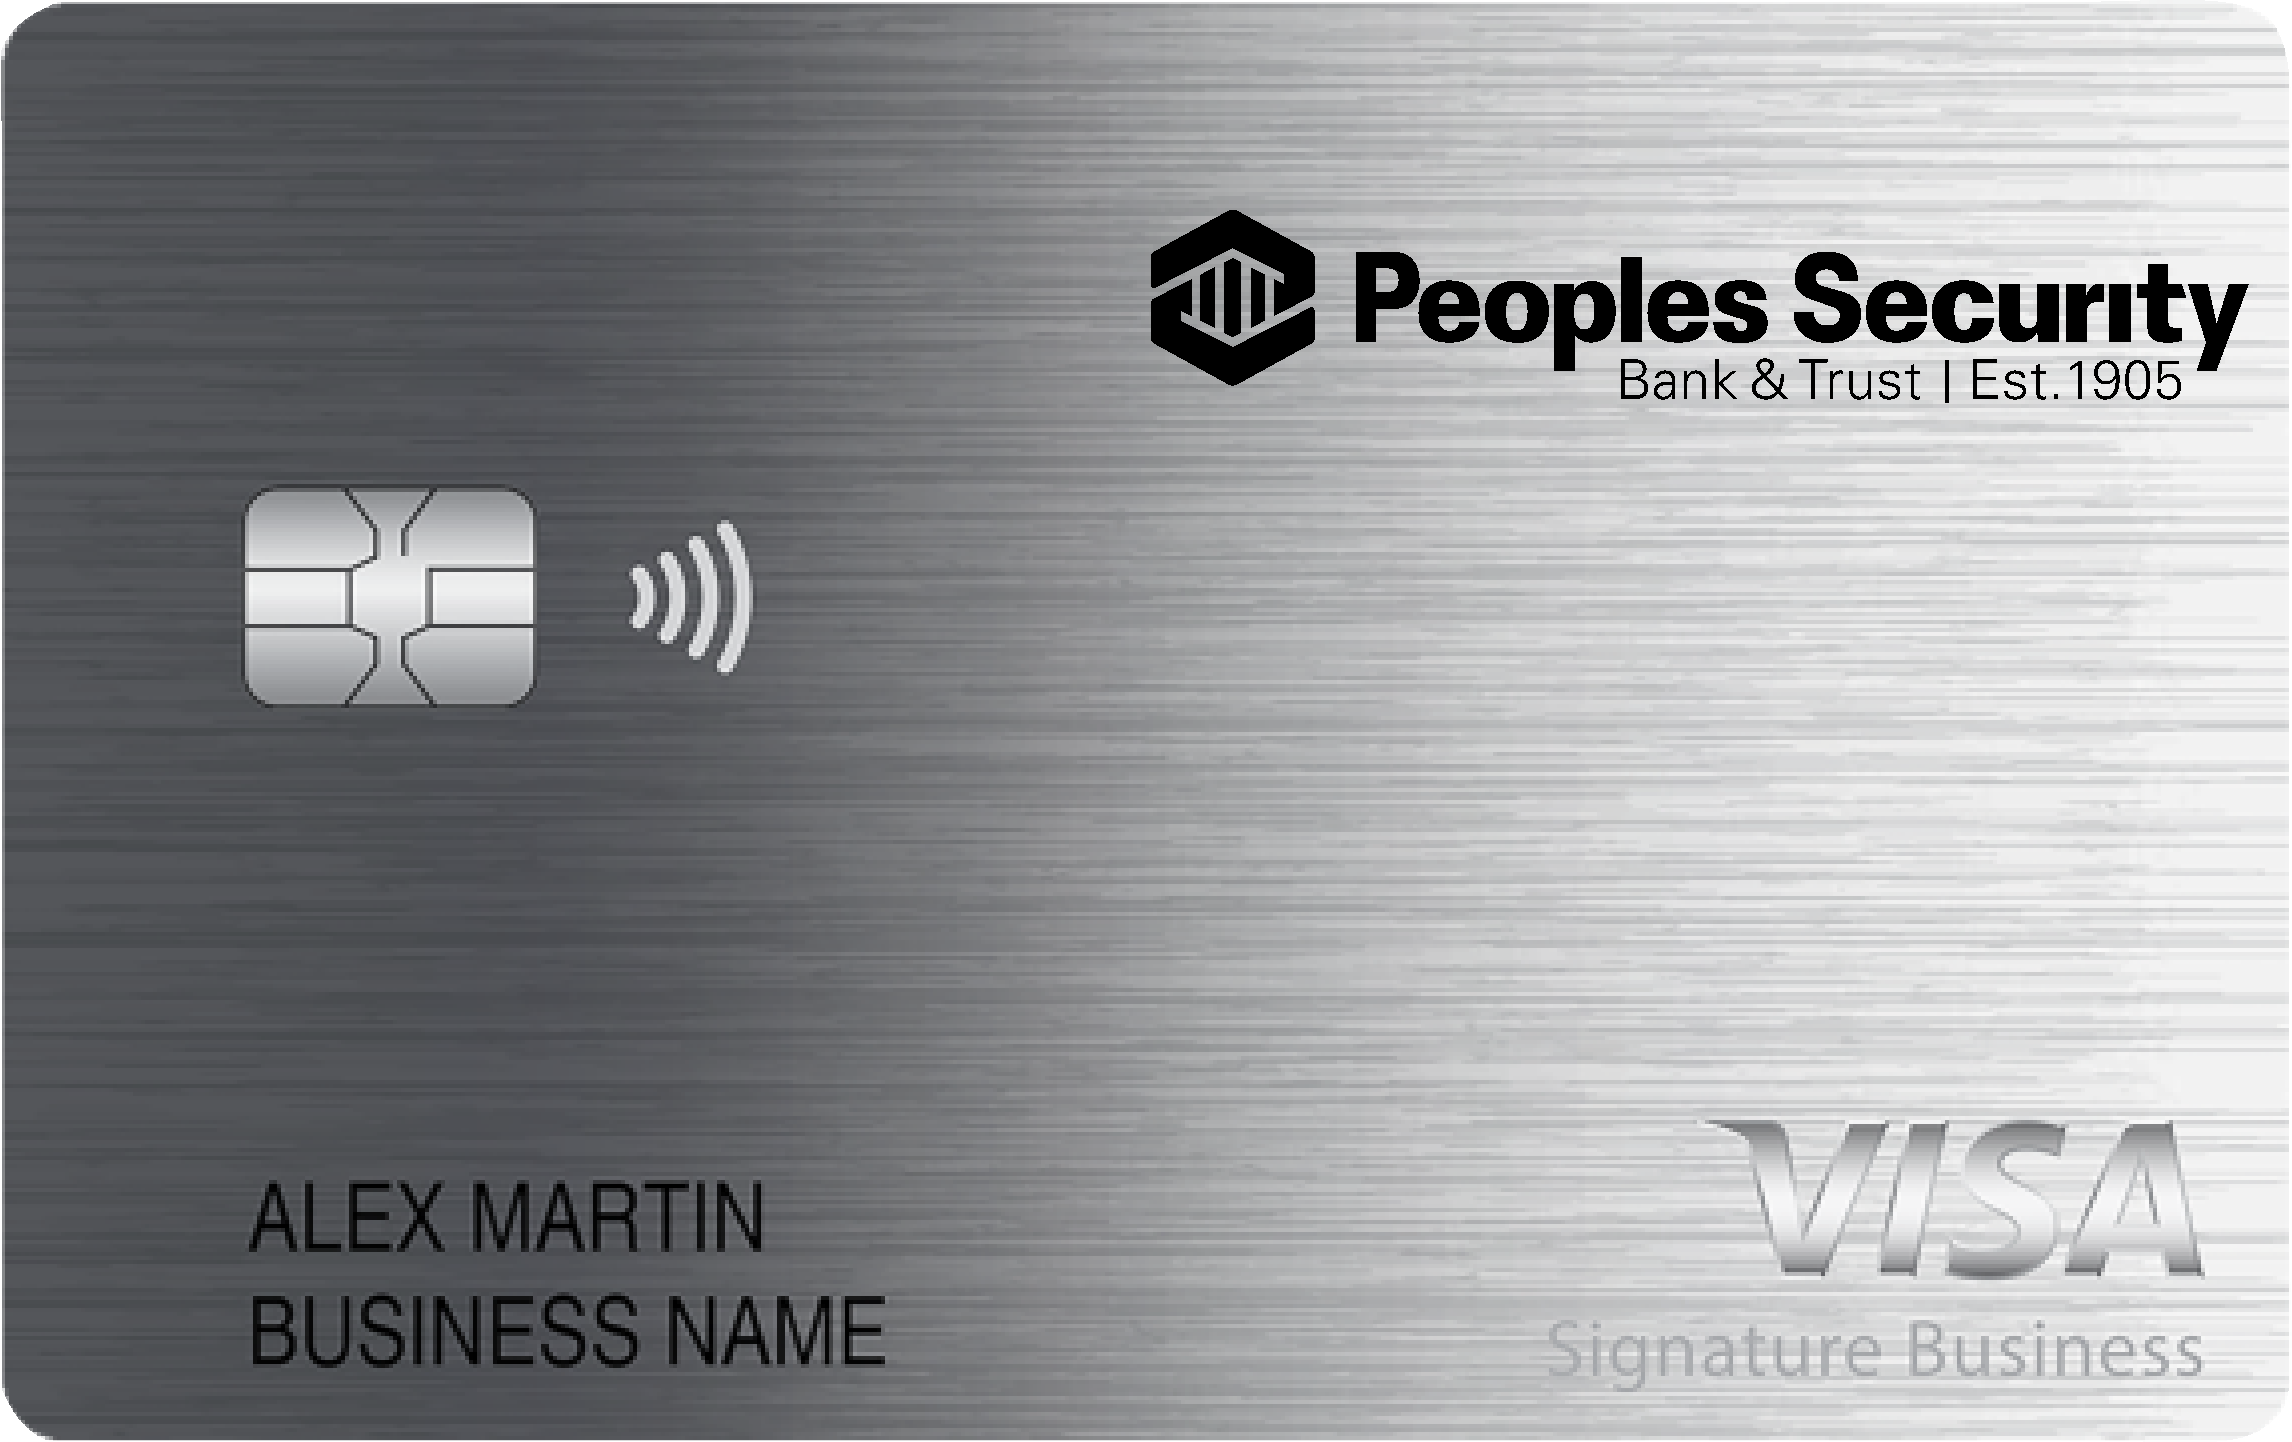 Peoples Security Bank & Trust Co. Smart Business Rewards Card